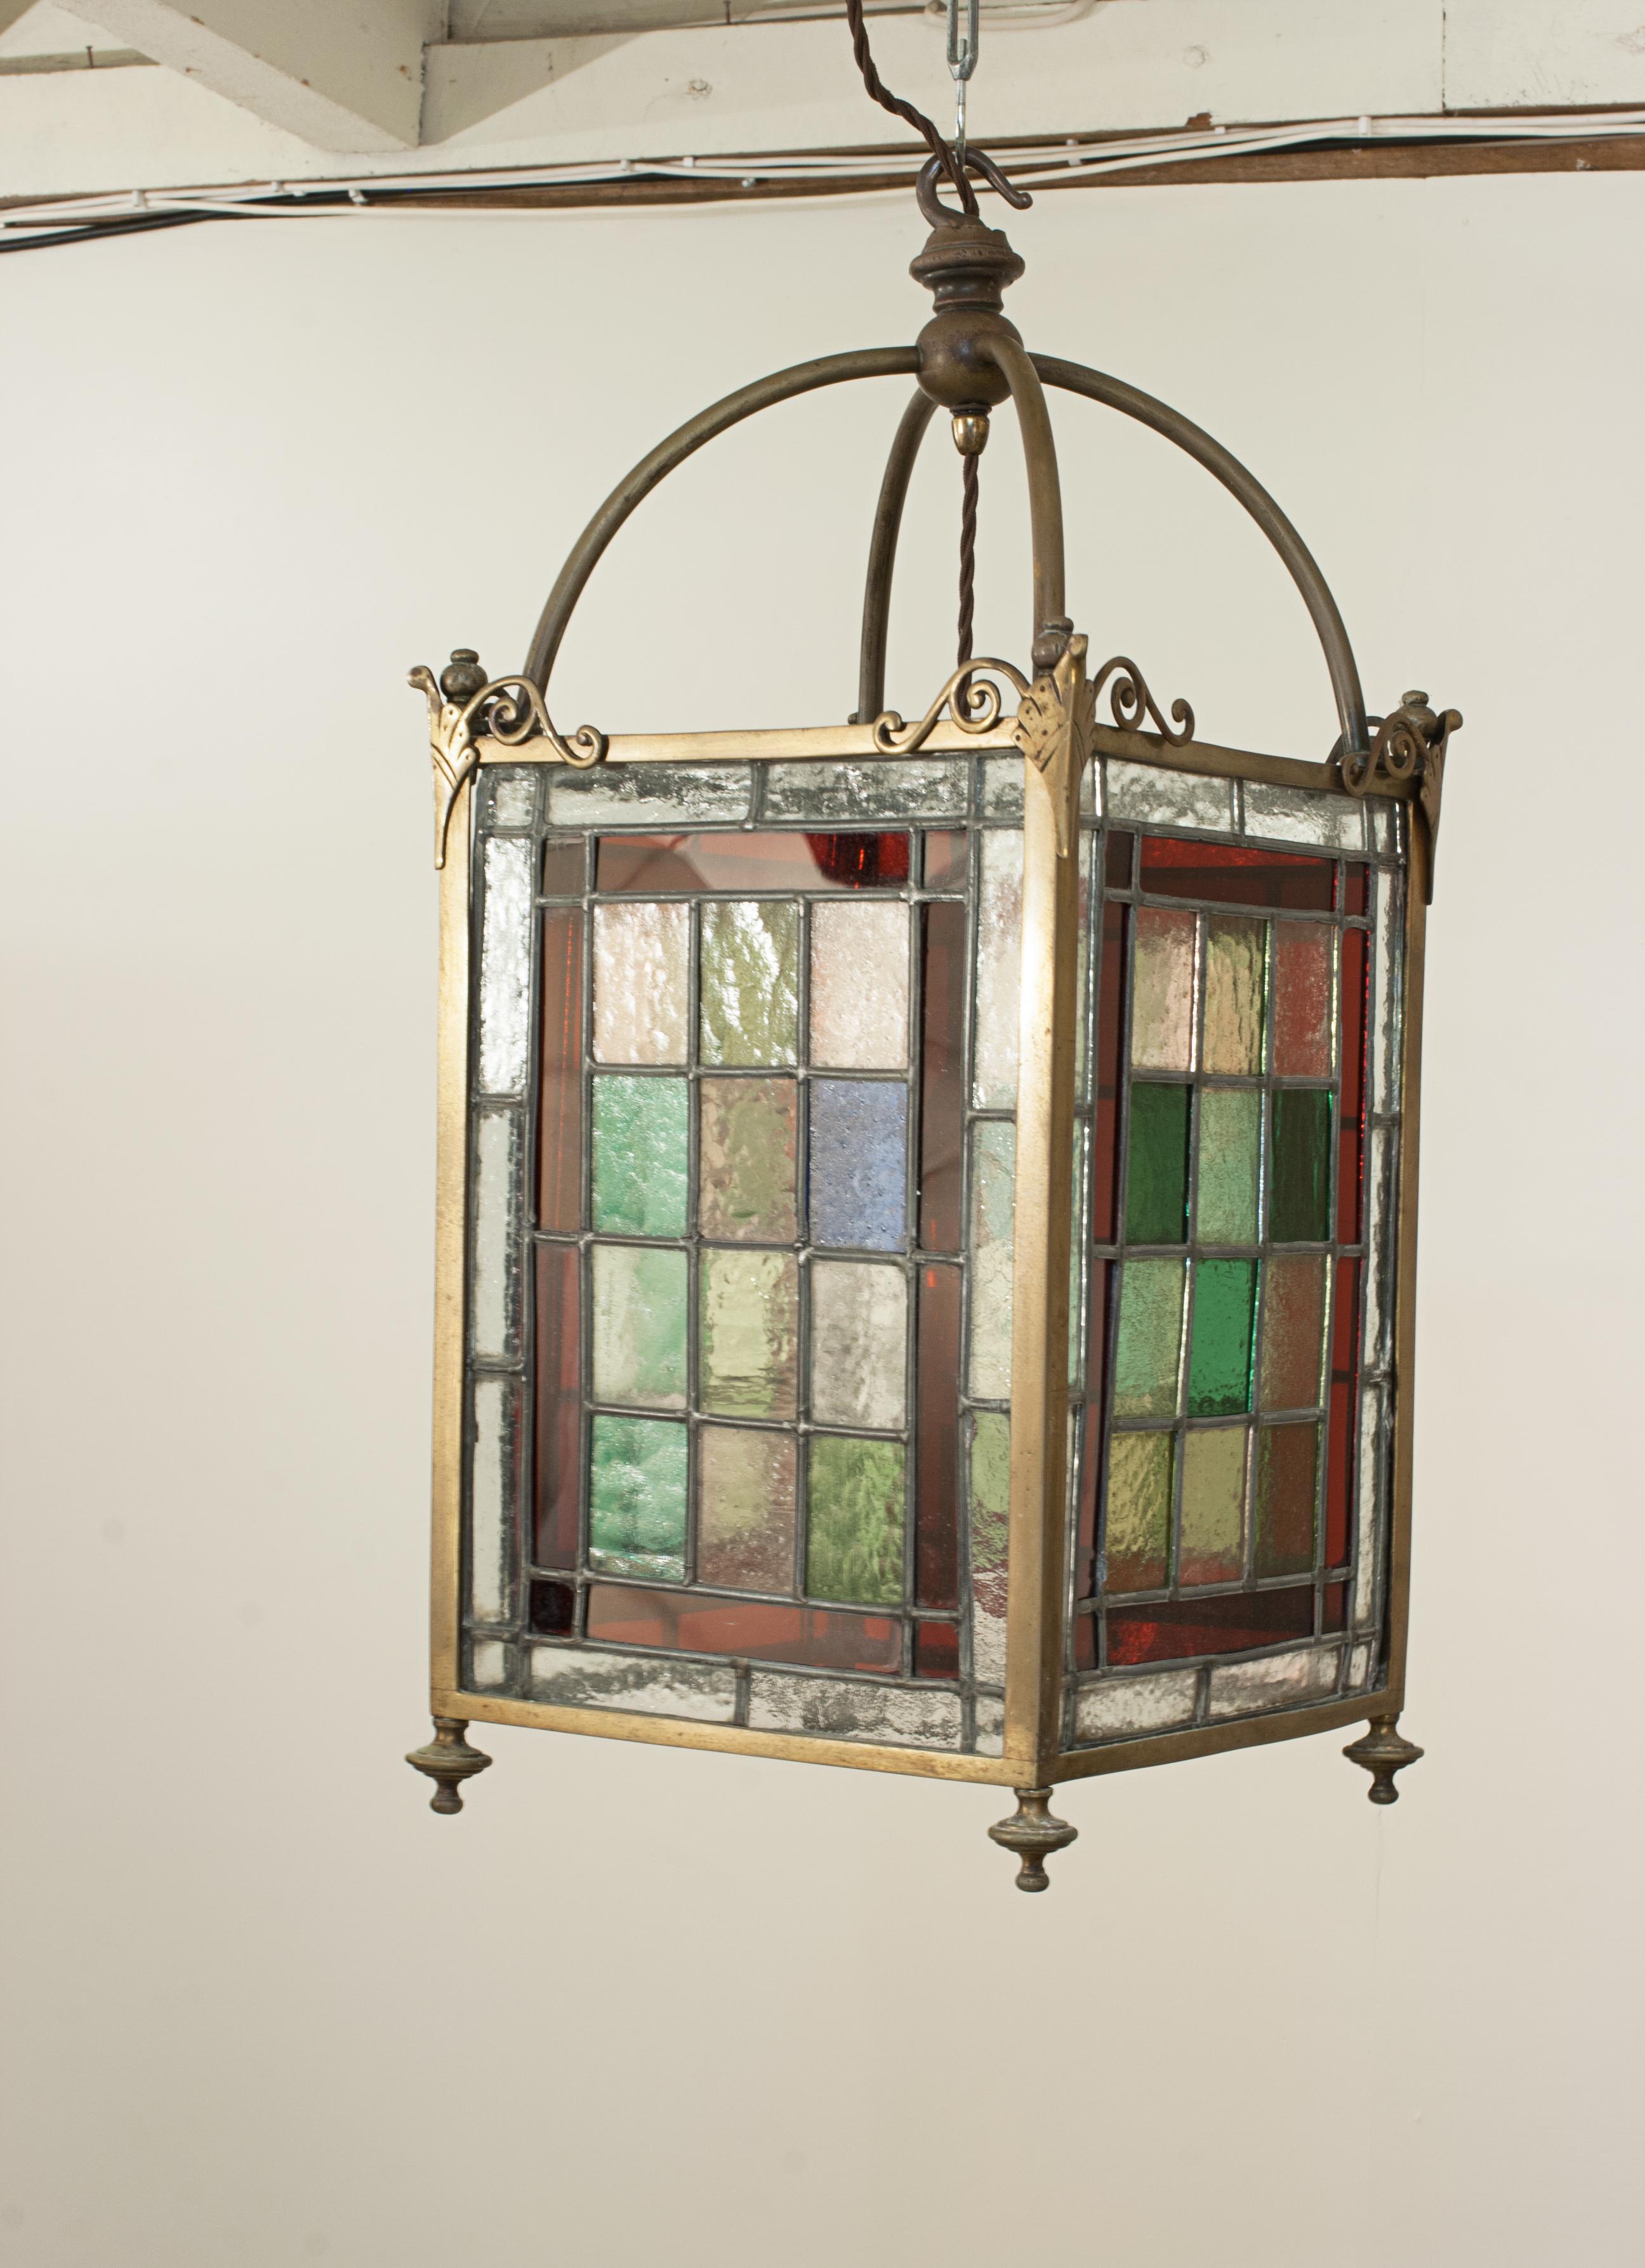 Victorian Stain Glass Ceiling Pendant Lantern.
A highly attractive and decorative ceiling light that will enhance any interior entrance or hallway. The four-sided leaded glass hall lantern has an antique brass frame with a small ceiling rose to hang